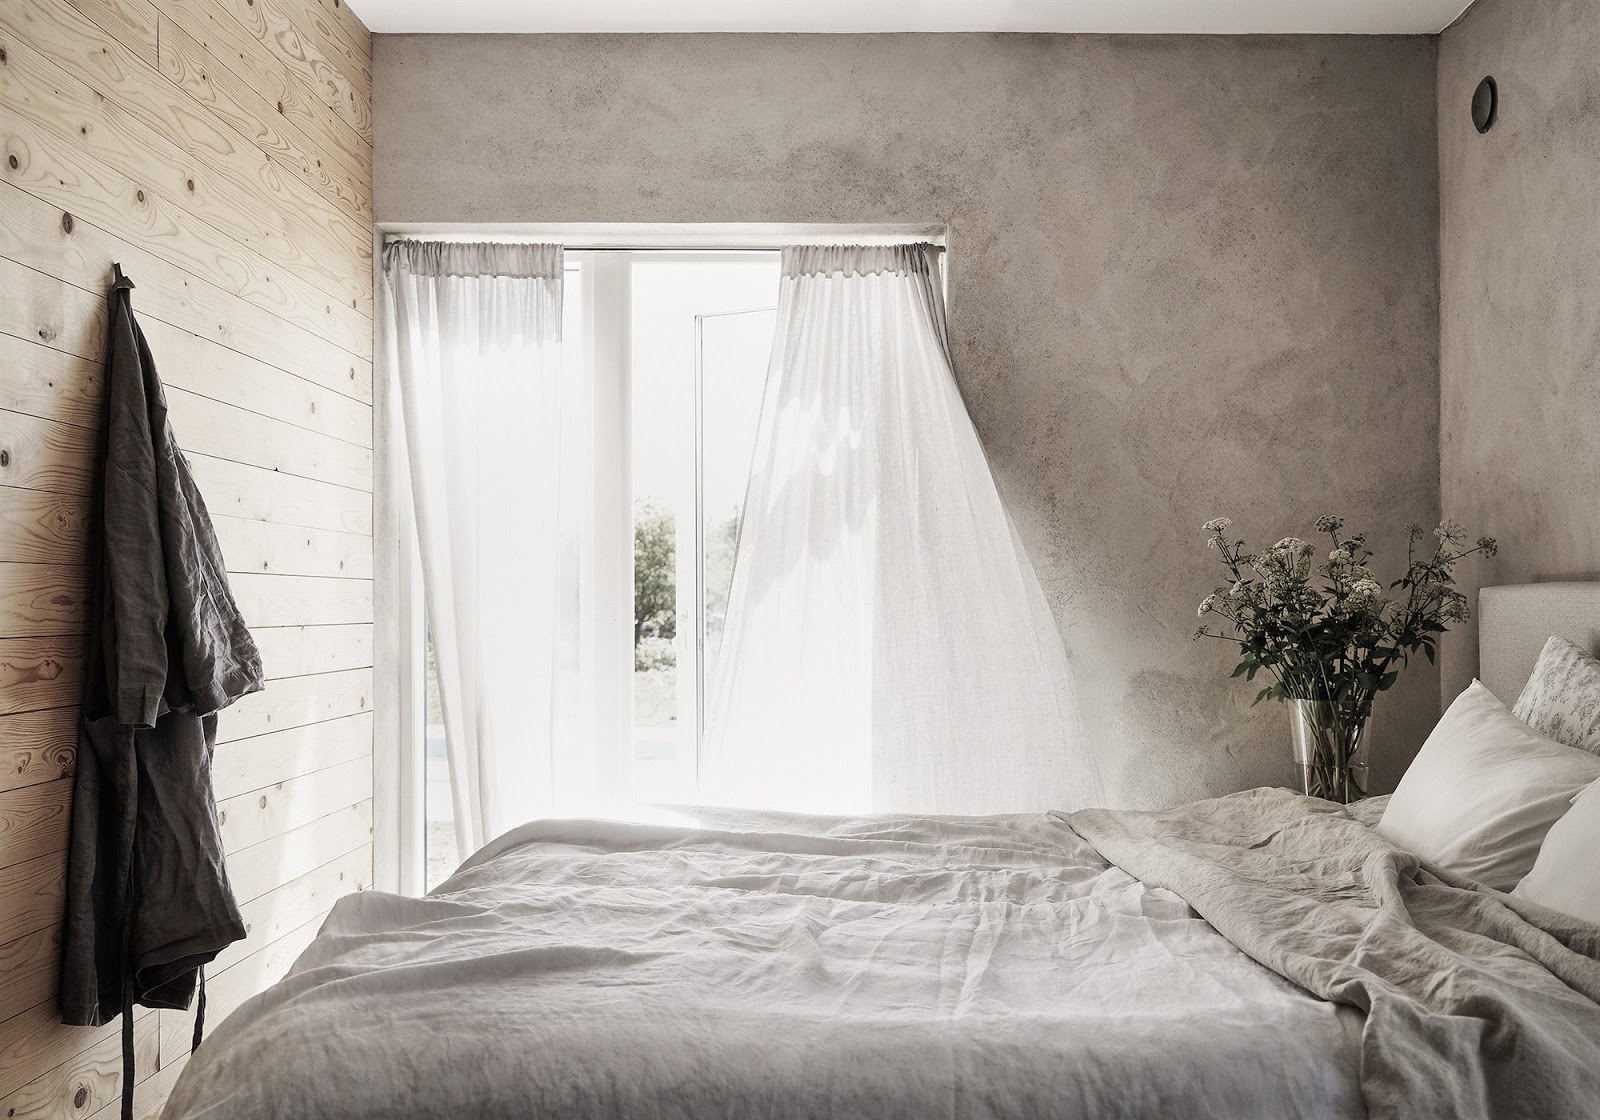 The master bedroom is decorated with concrete, fabrics give texture to the decor